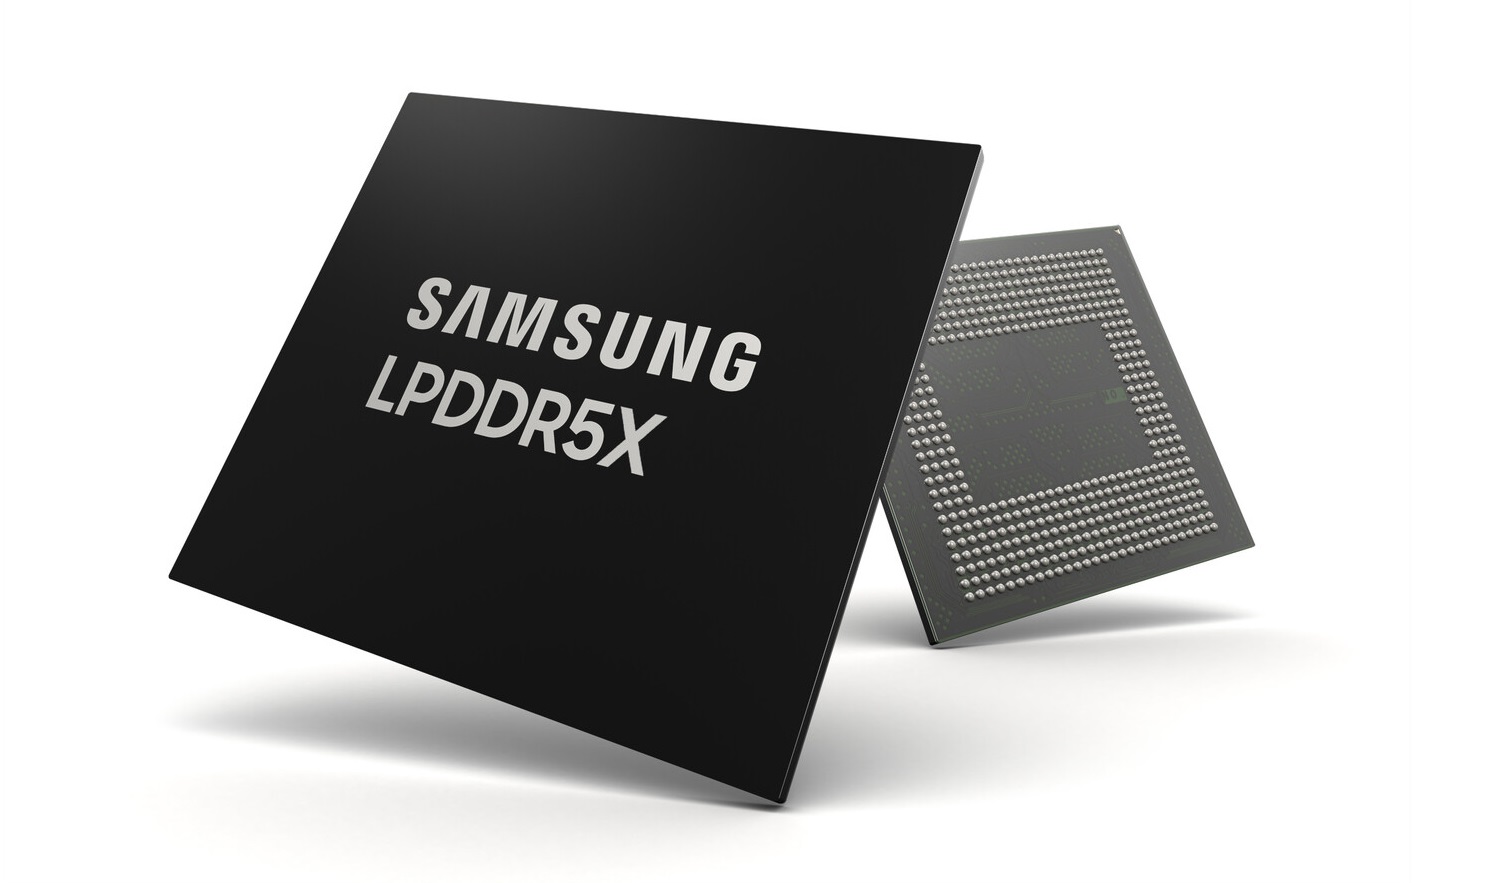 Samsung boosts future PCs with the world’s fastest LPDDR5X memory chips